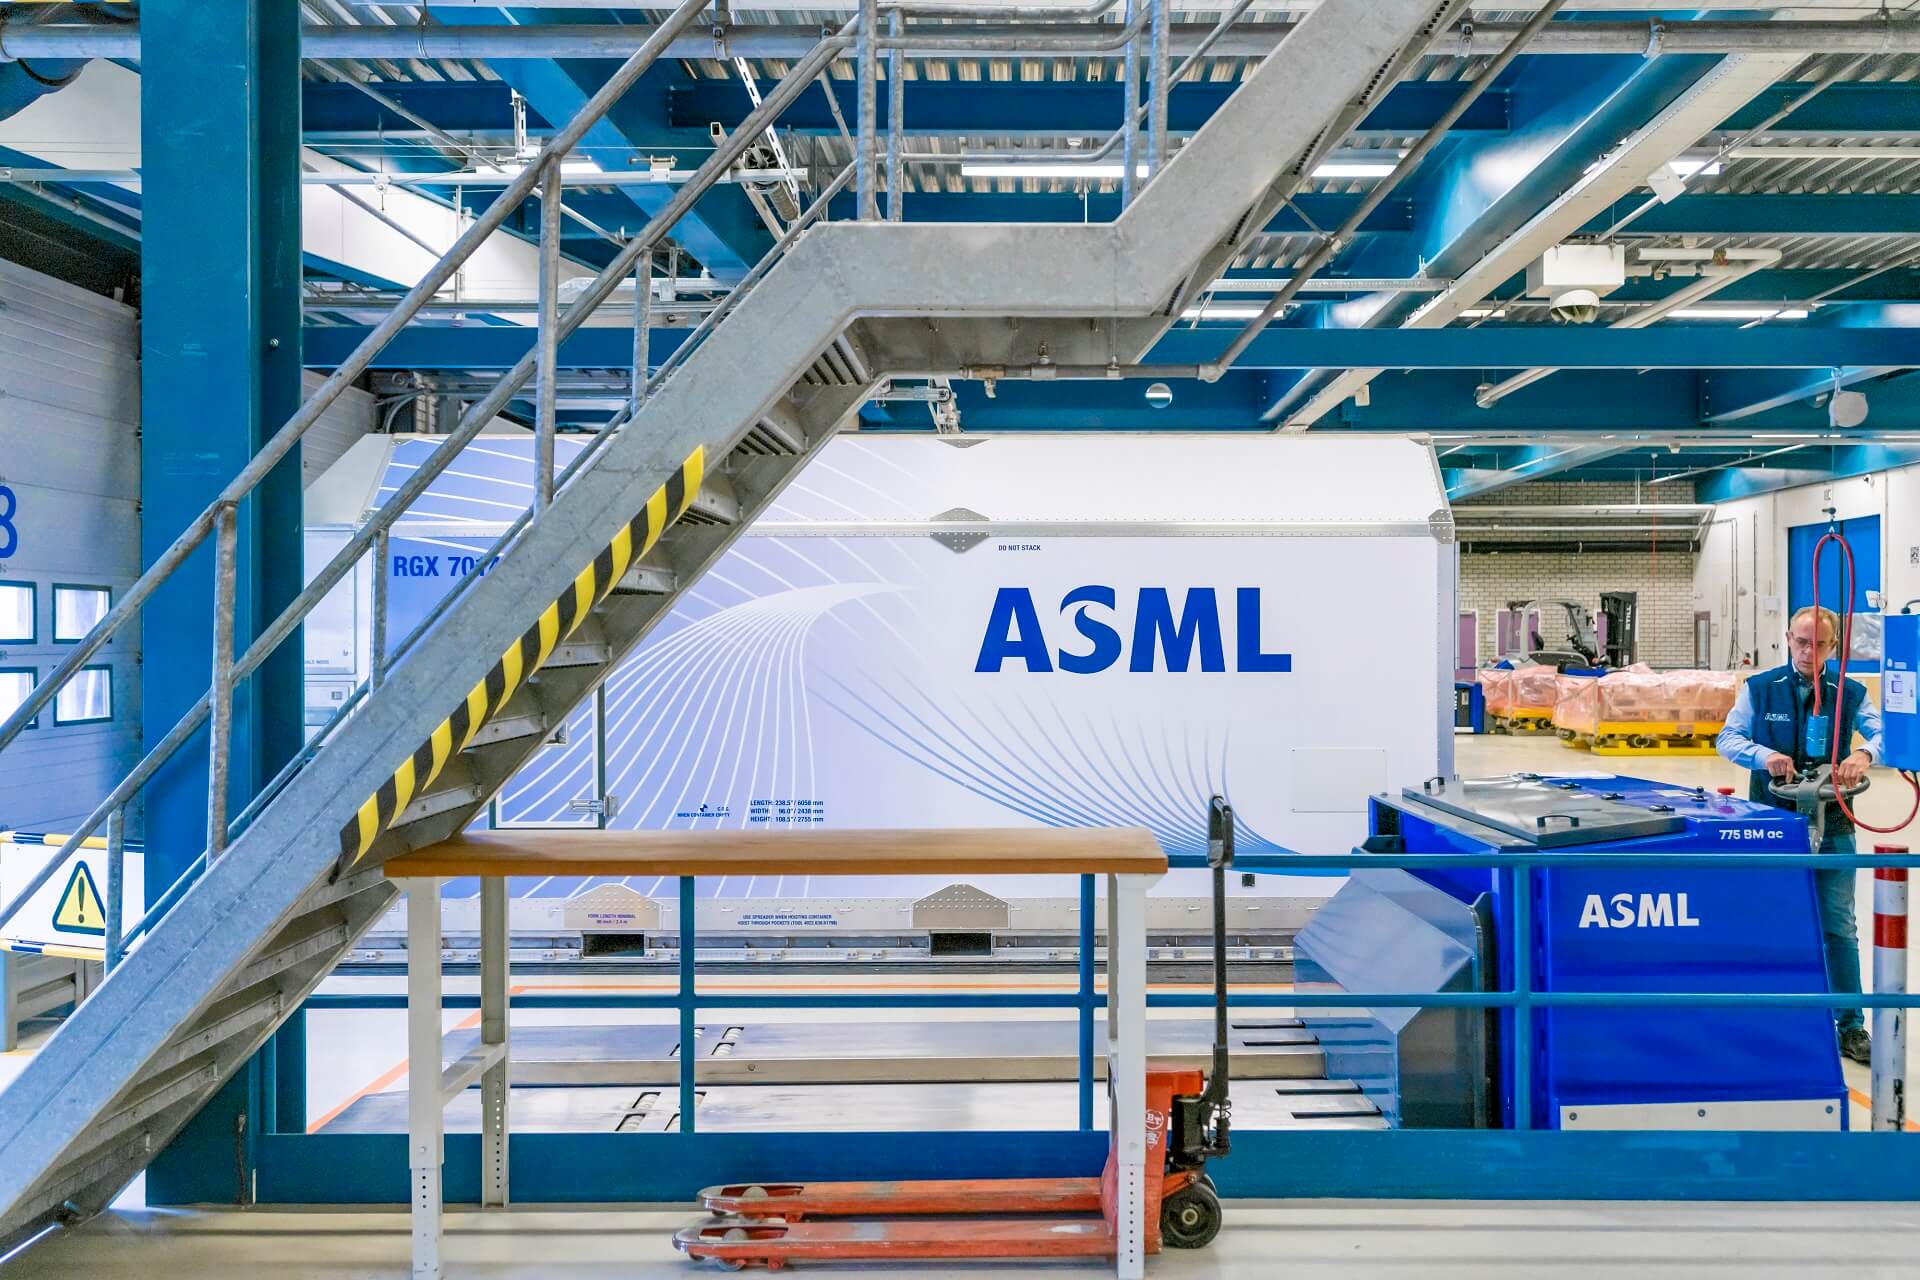 People at work in the ASML Warehouse Twinscan Factory